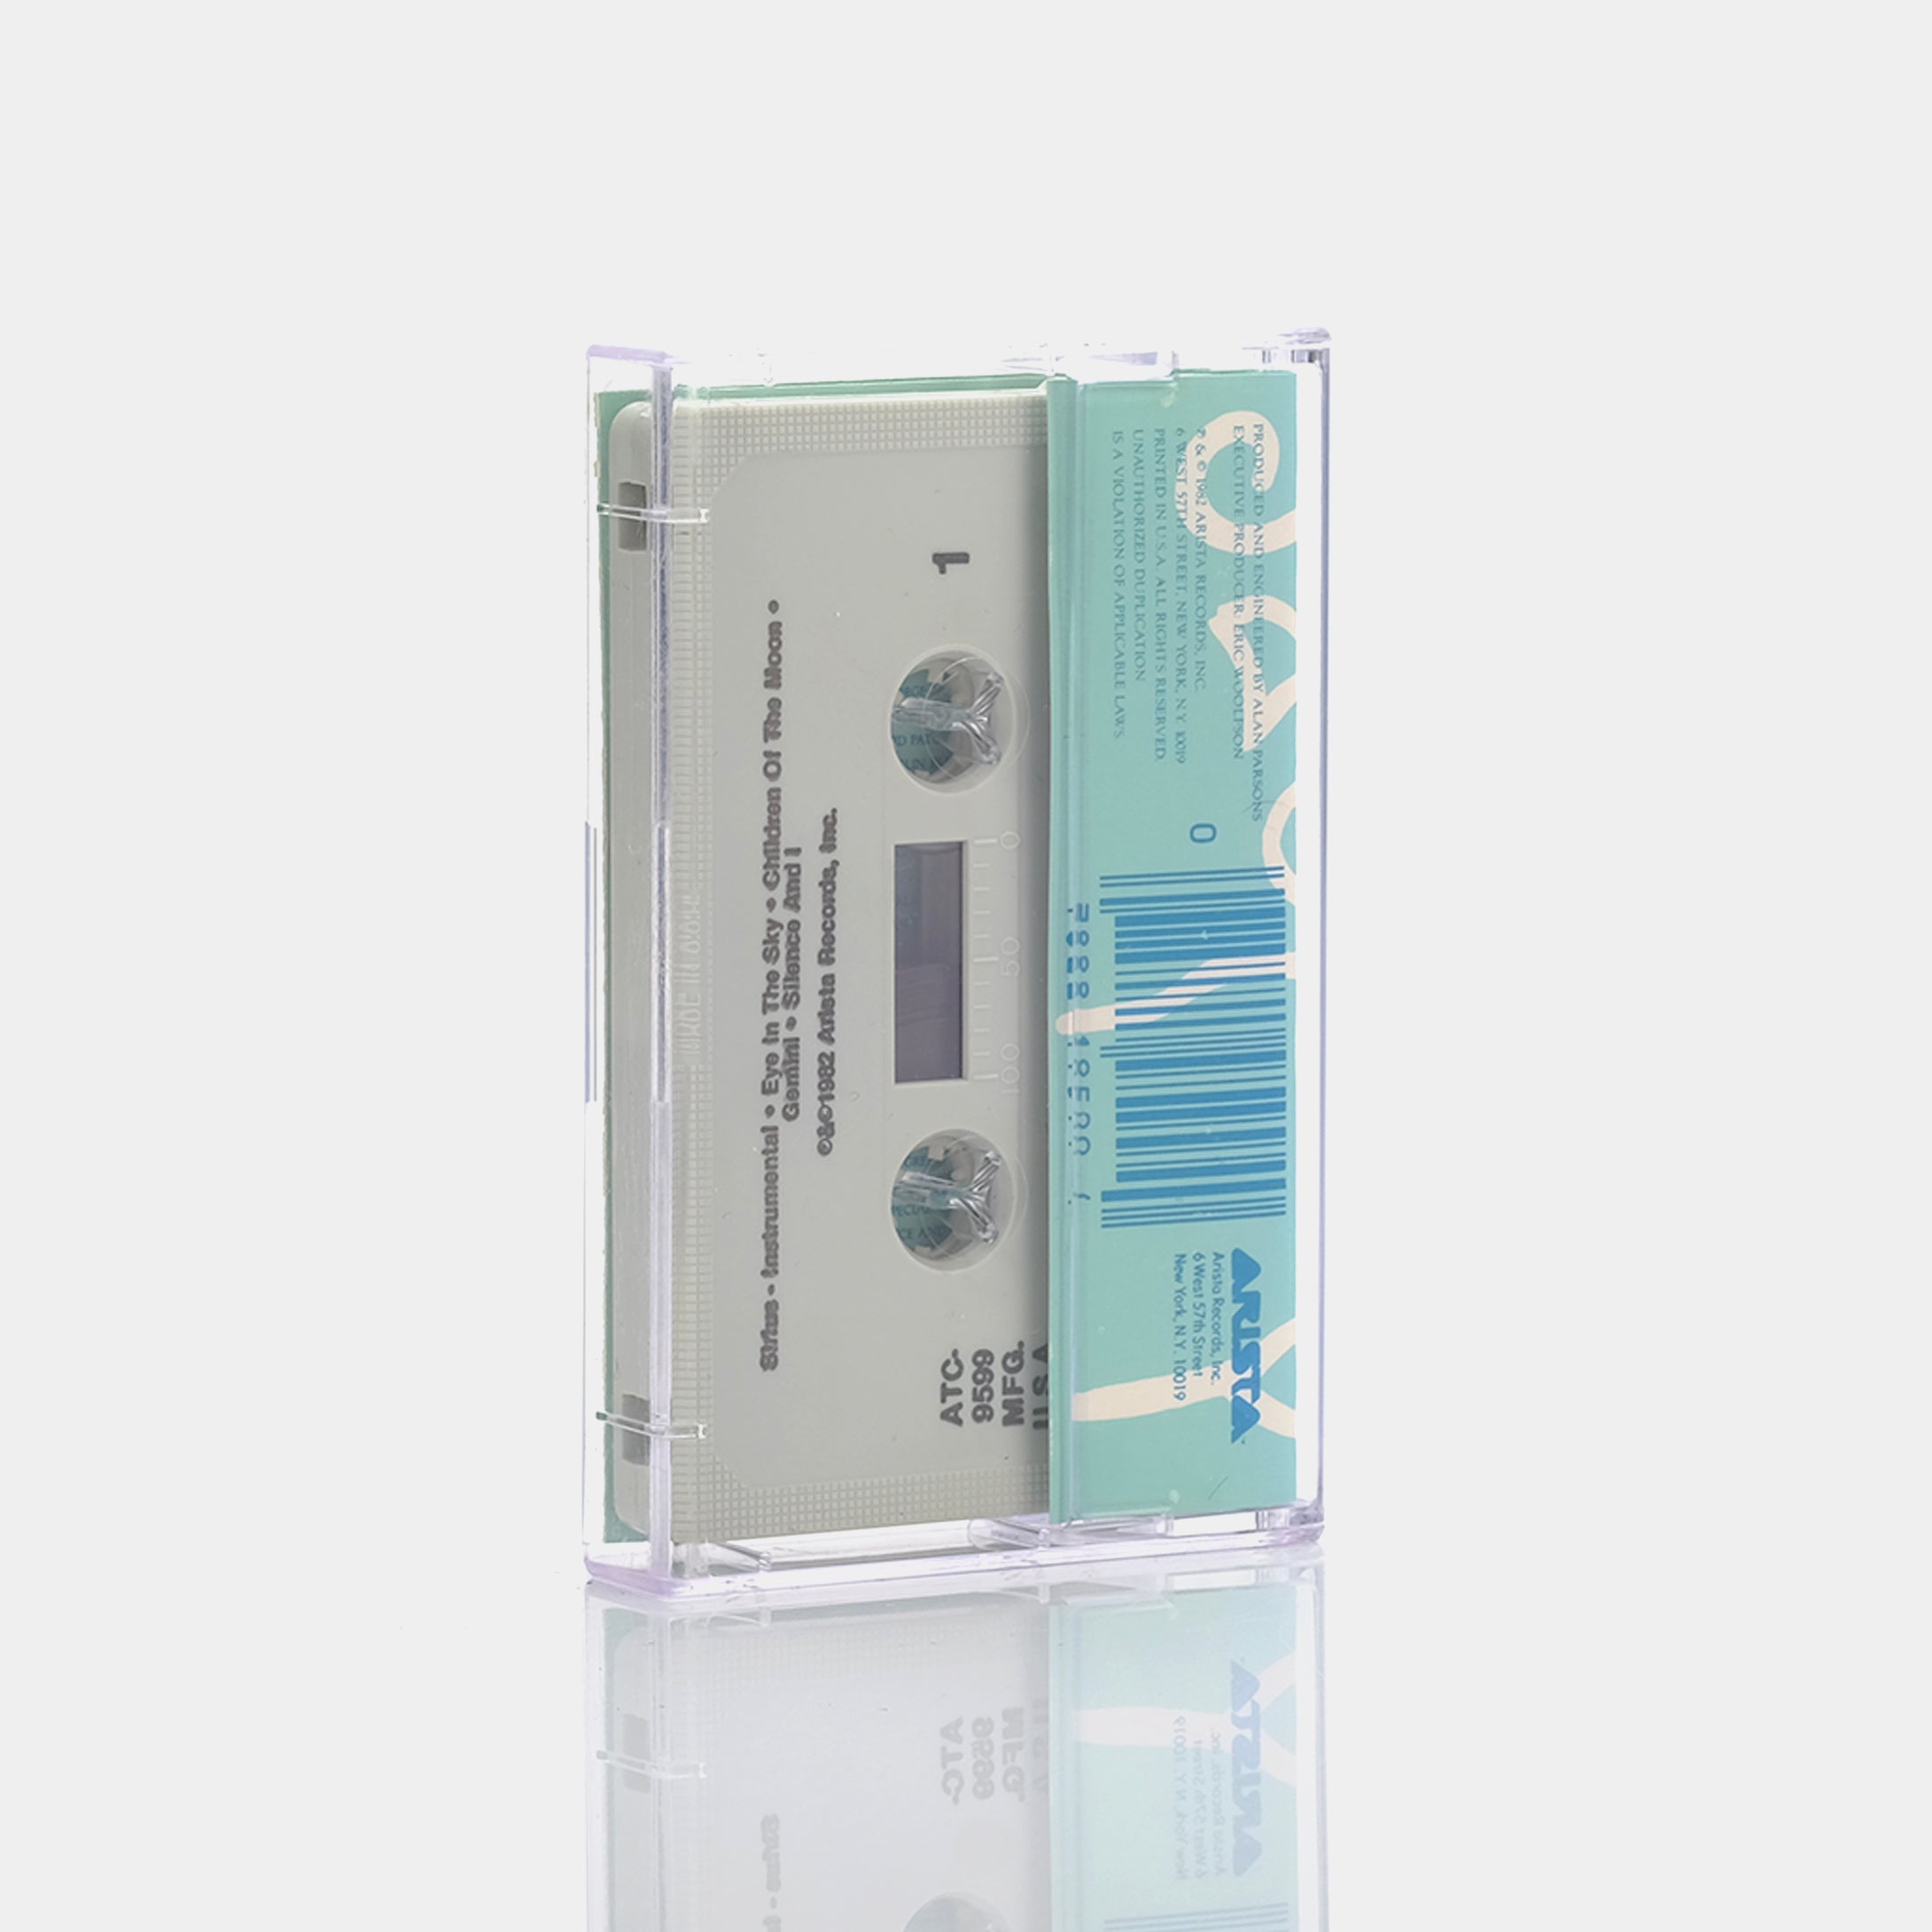 The Alan Parsons Project - Eye In The Sky Cassette Tape